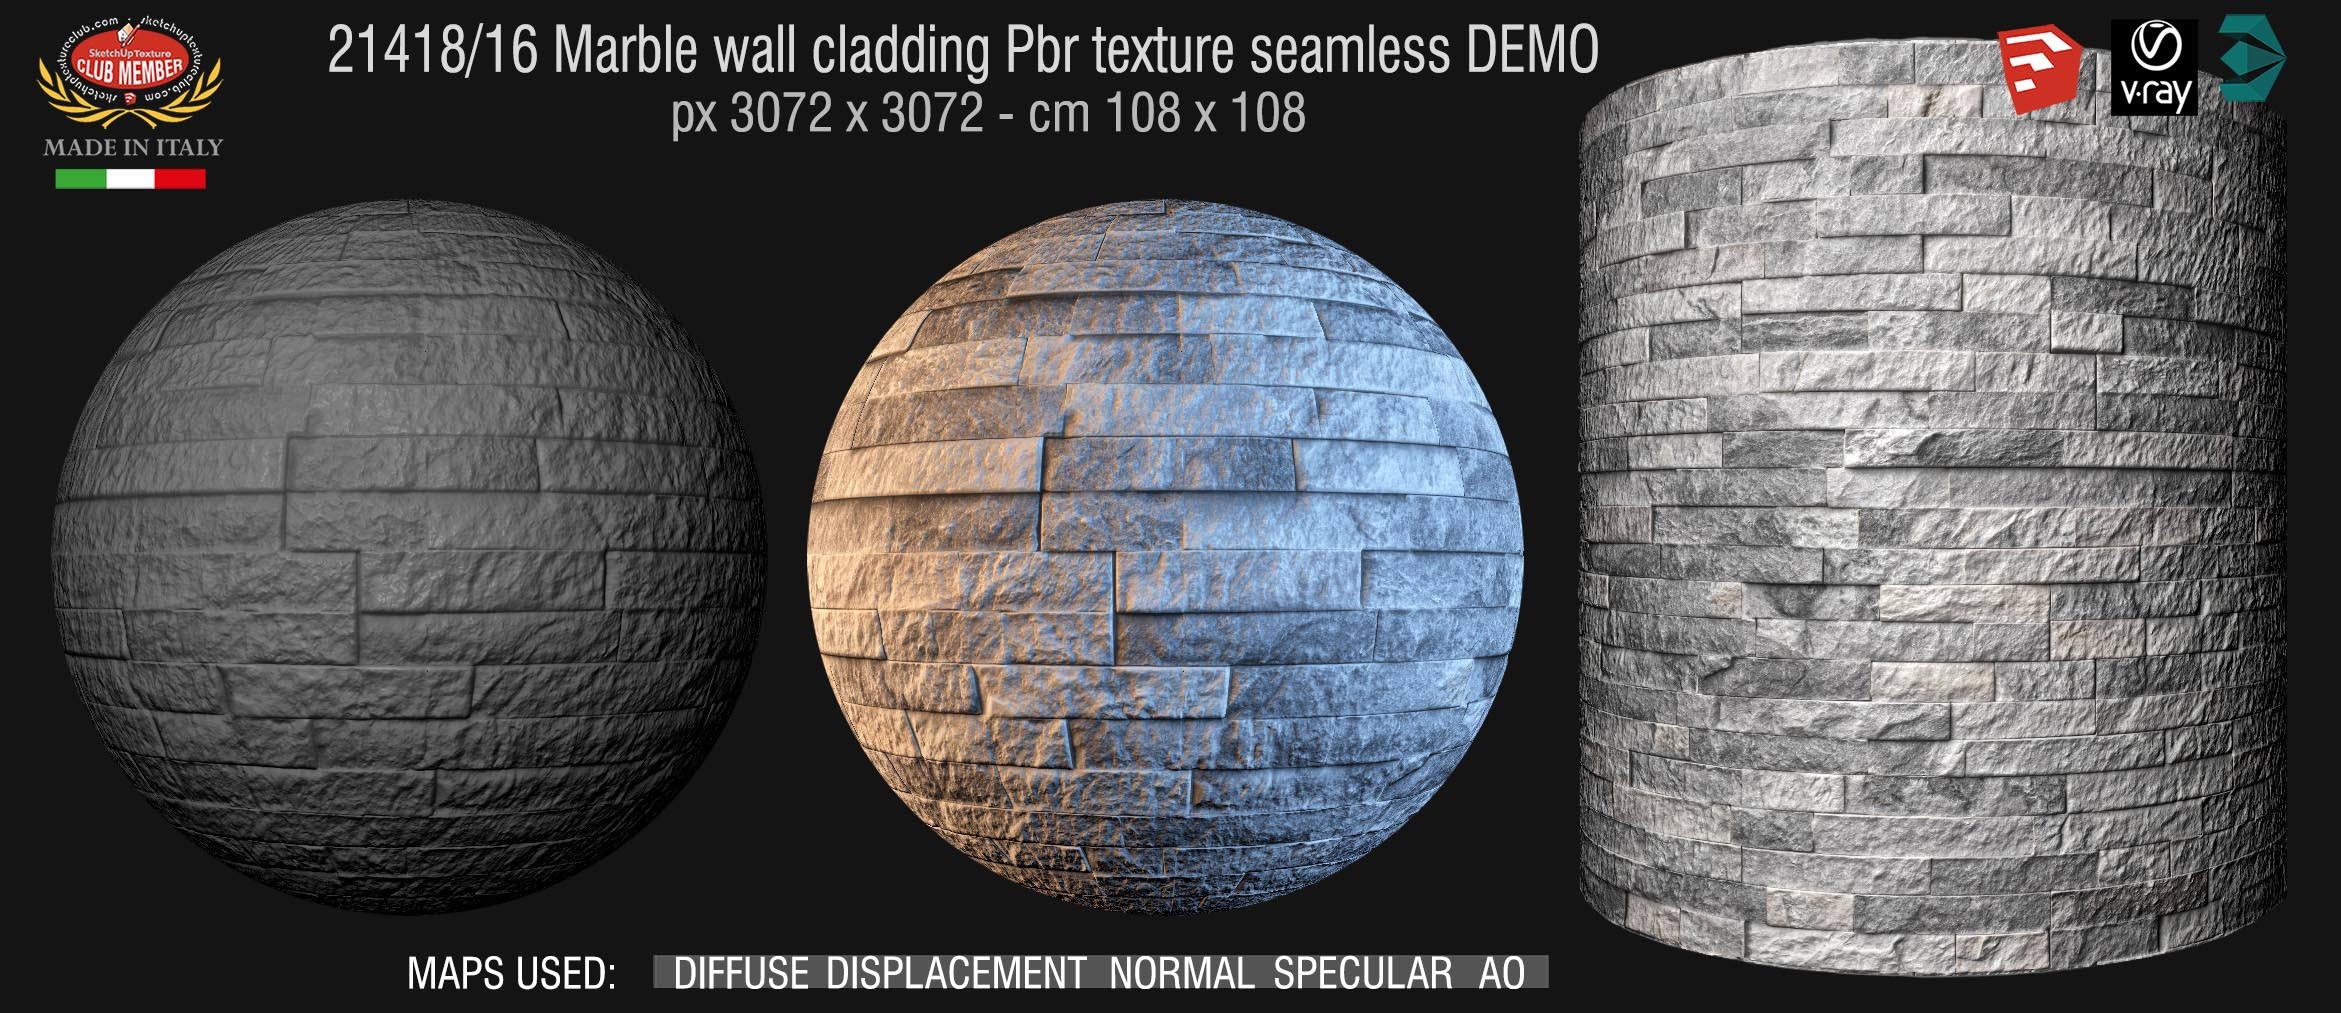 21418_16 Marble wall cladding Pbr texture seamless DEMO